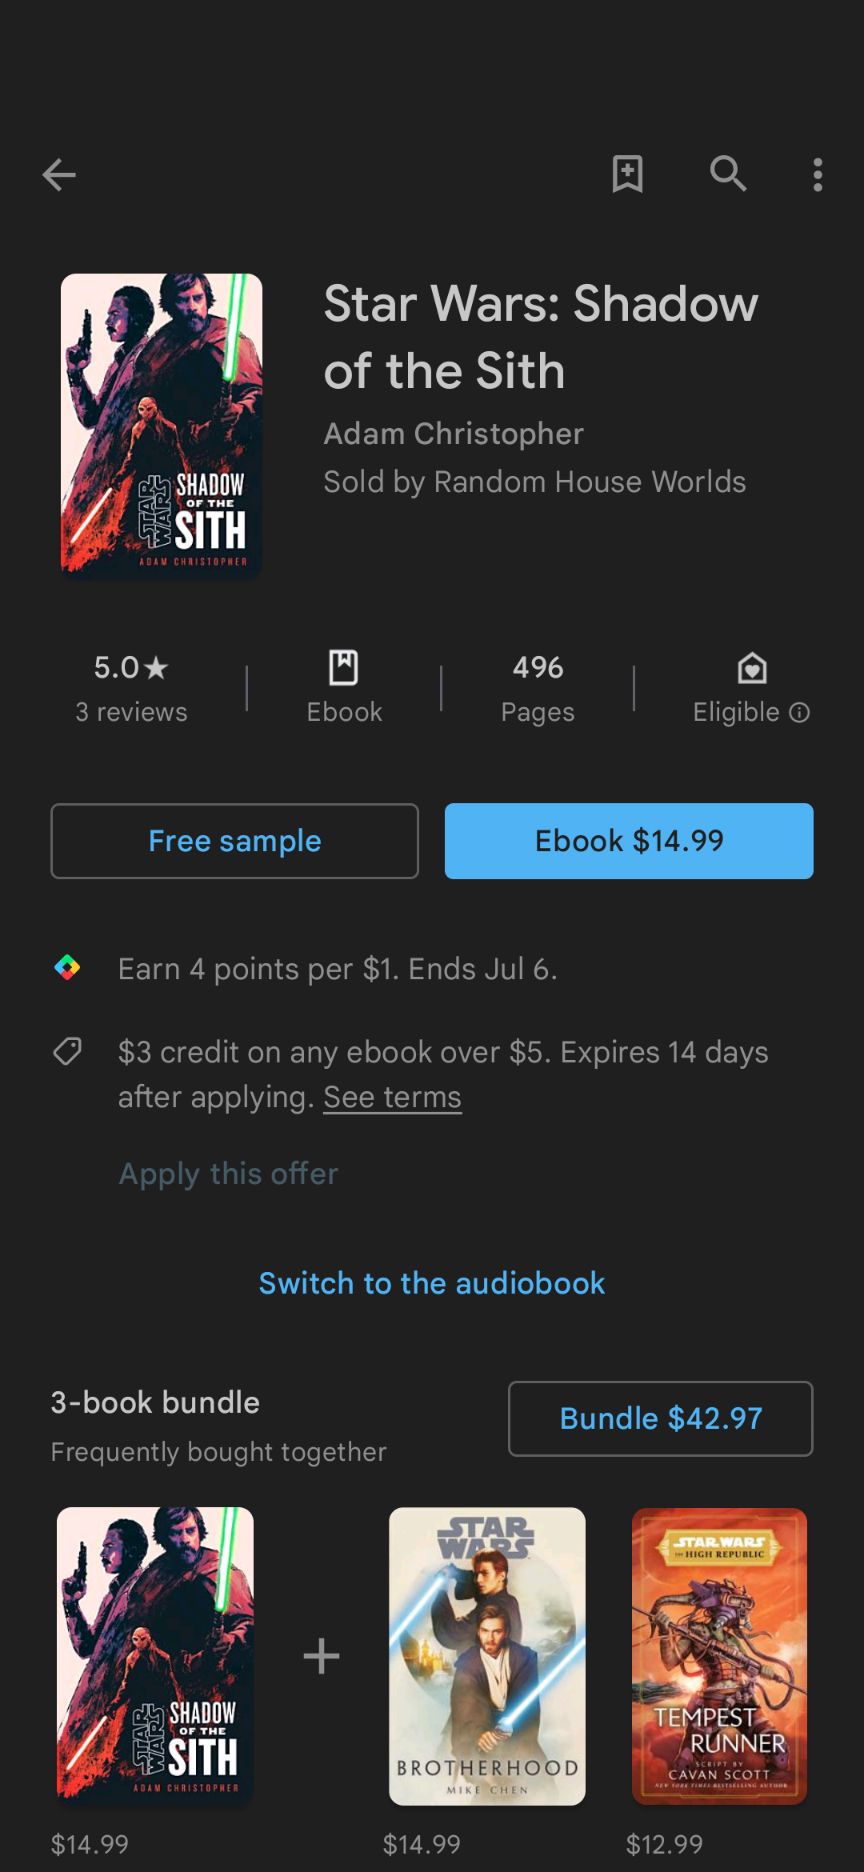 The Google Play Store app's "Star Wars: Shadow of the Sith" listing.